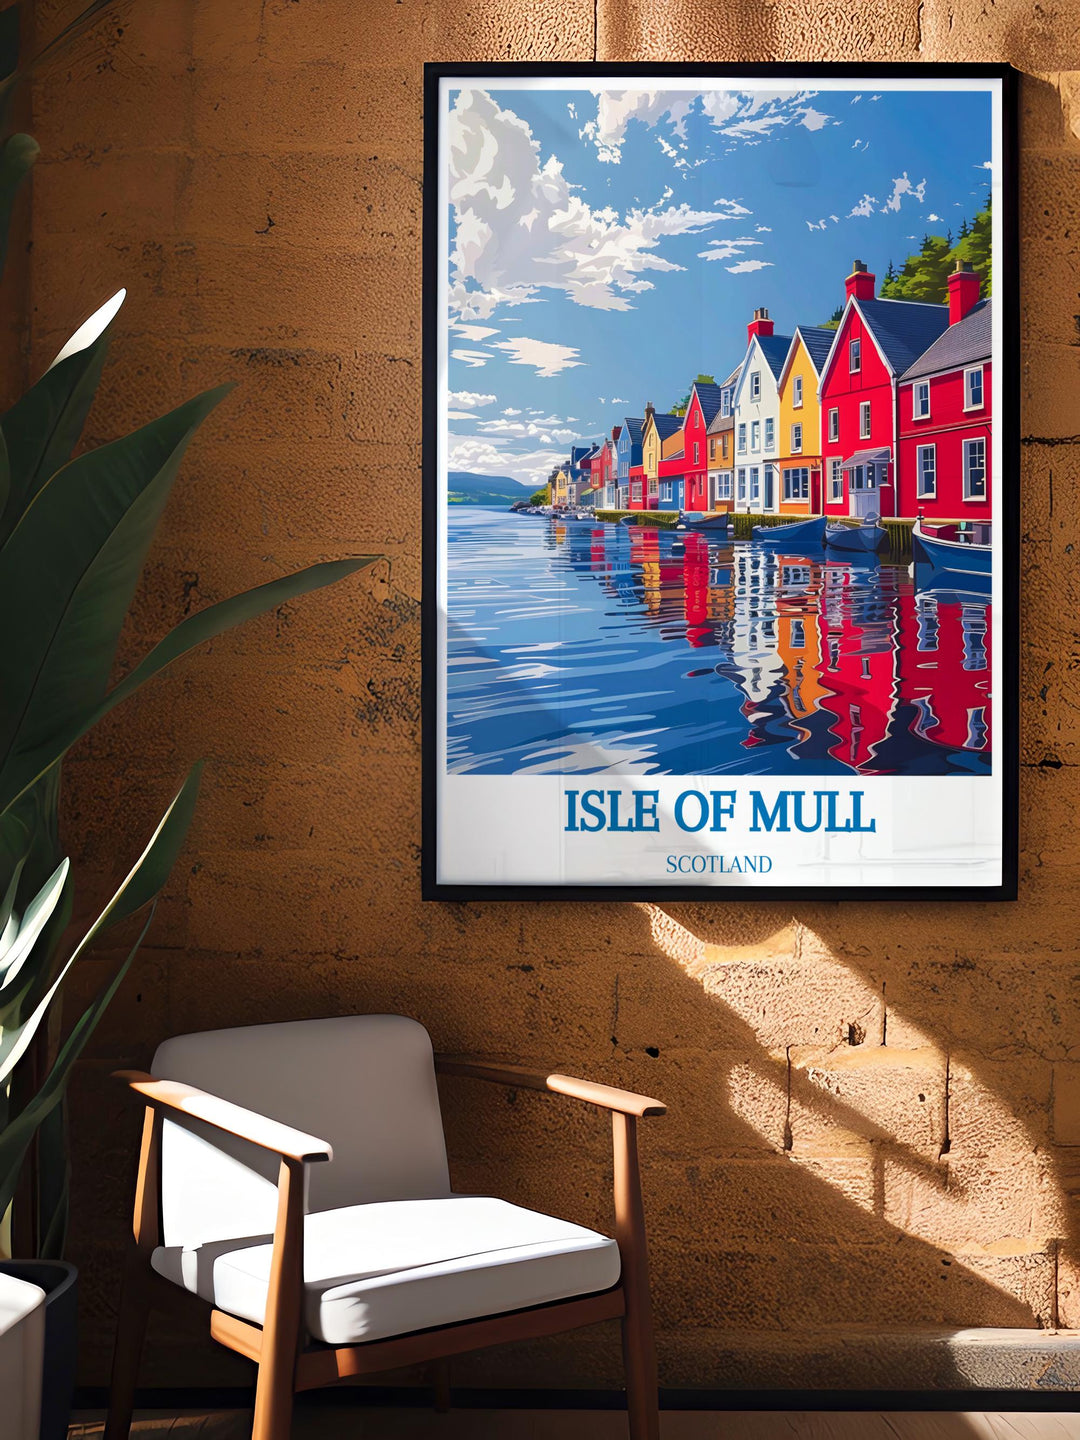 Art print of Tobermory Harbour with detailed waterfront scenes perfect for adding character to office or home environments